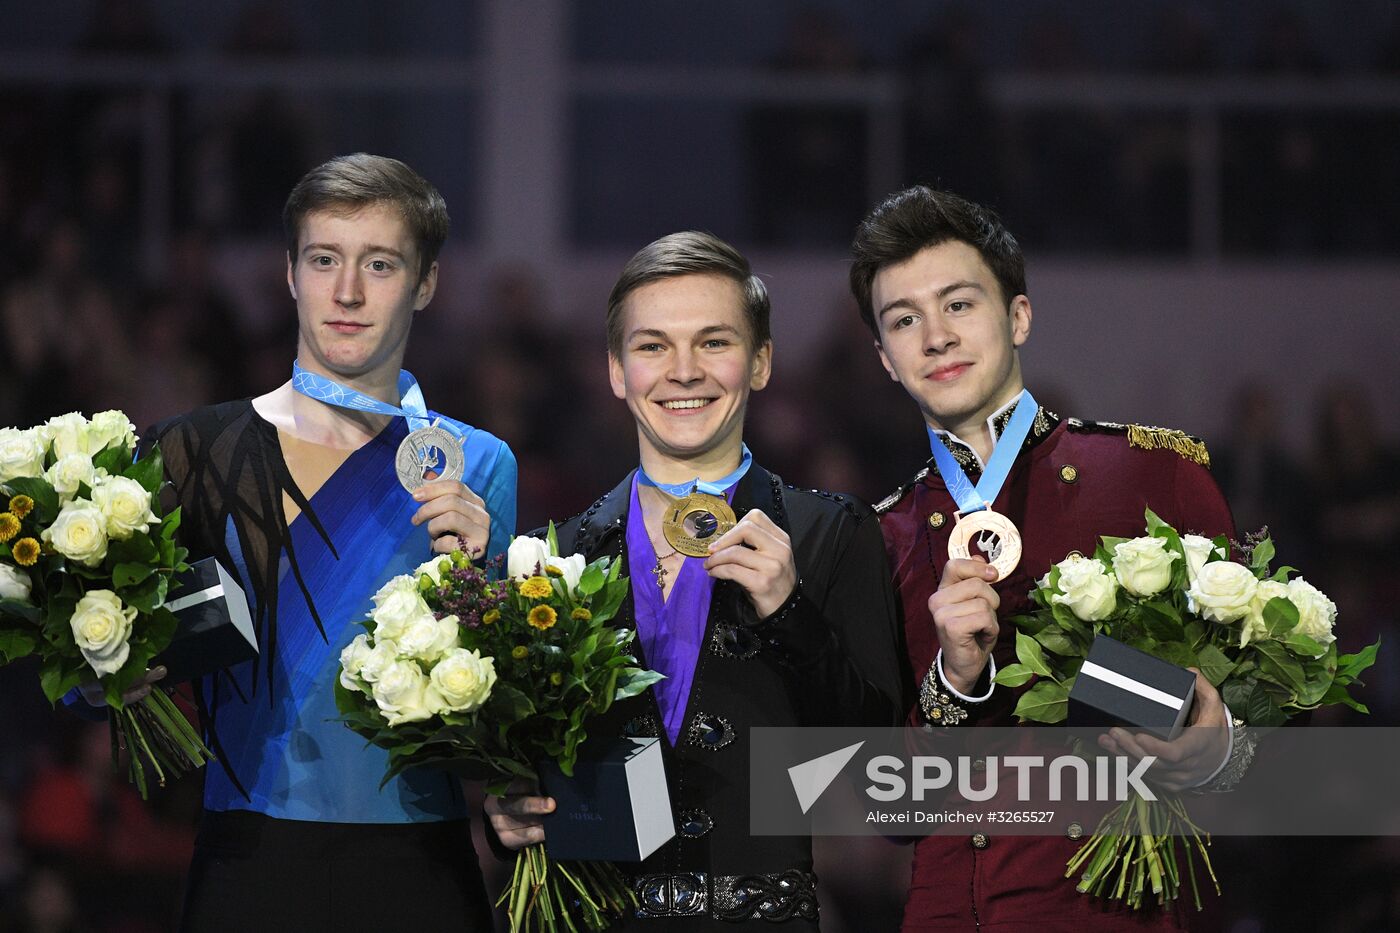 Russian FWinners of the men's competition at the Russian Figure Skating Championships during tigure Skating Championships. Awarding ceremony